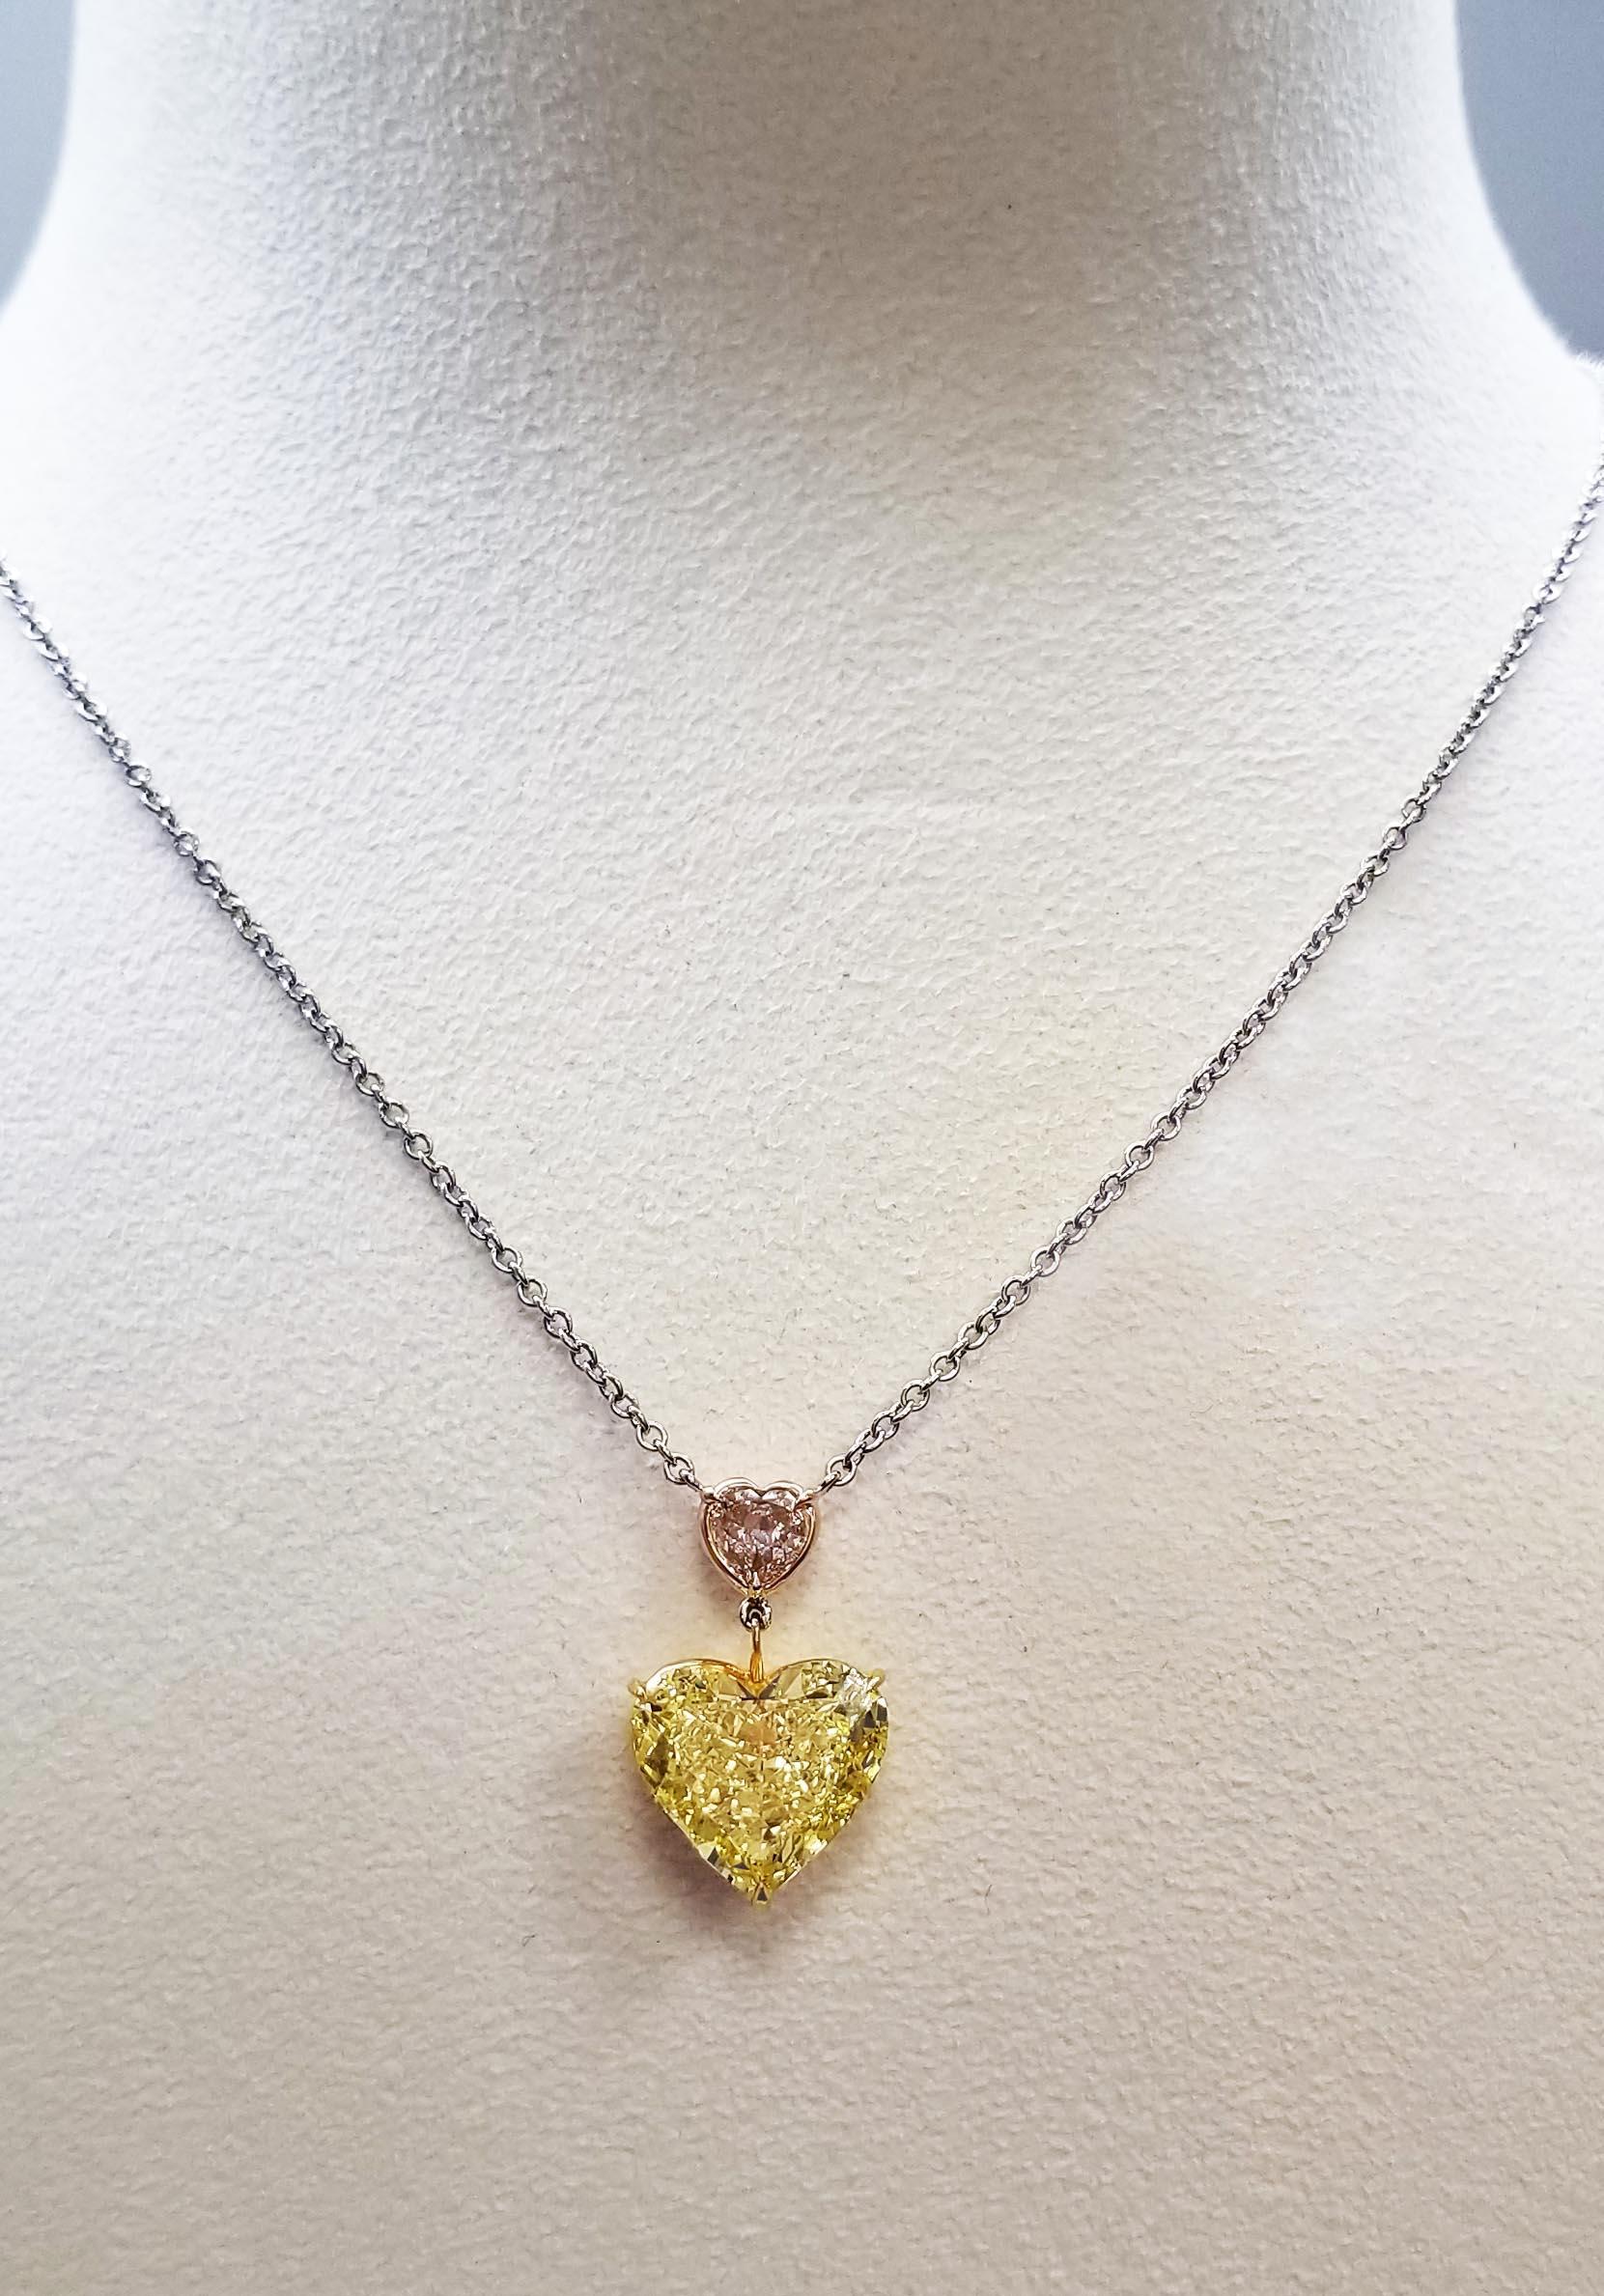 Scarselli is featuring this 6.42 carat heart shaped Fancy Vivid Yellow color diamond and an A 0.51 carat light pink I2 heart shape mounted on a handmade platinum and 18 karats white gold chain necklace (see certificate picture for detailed stones